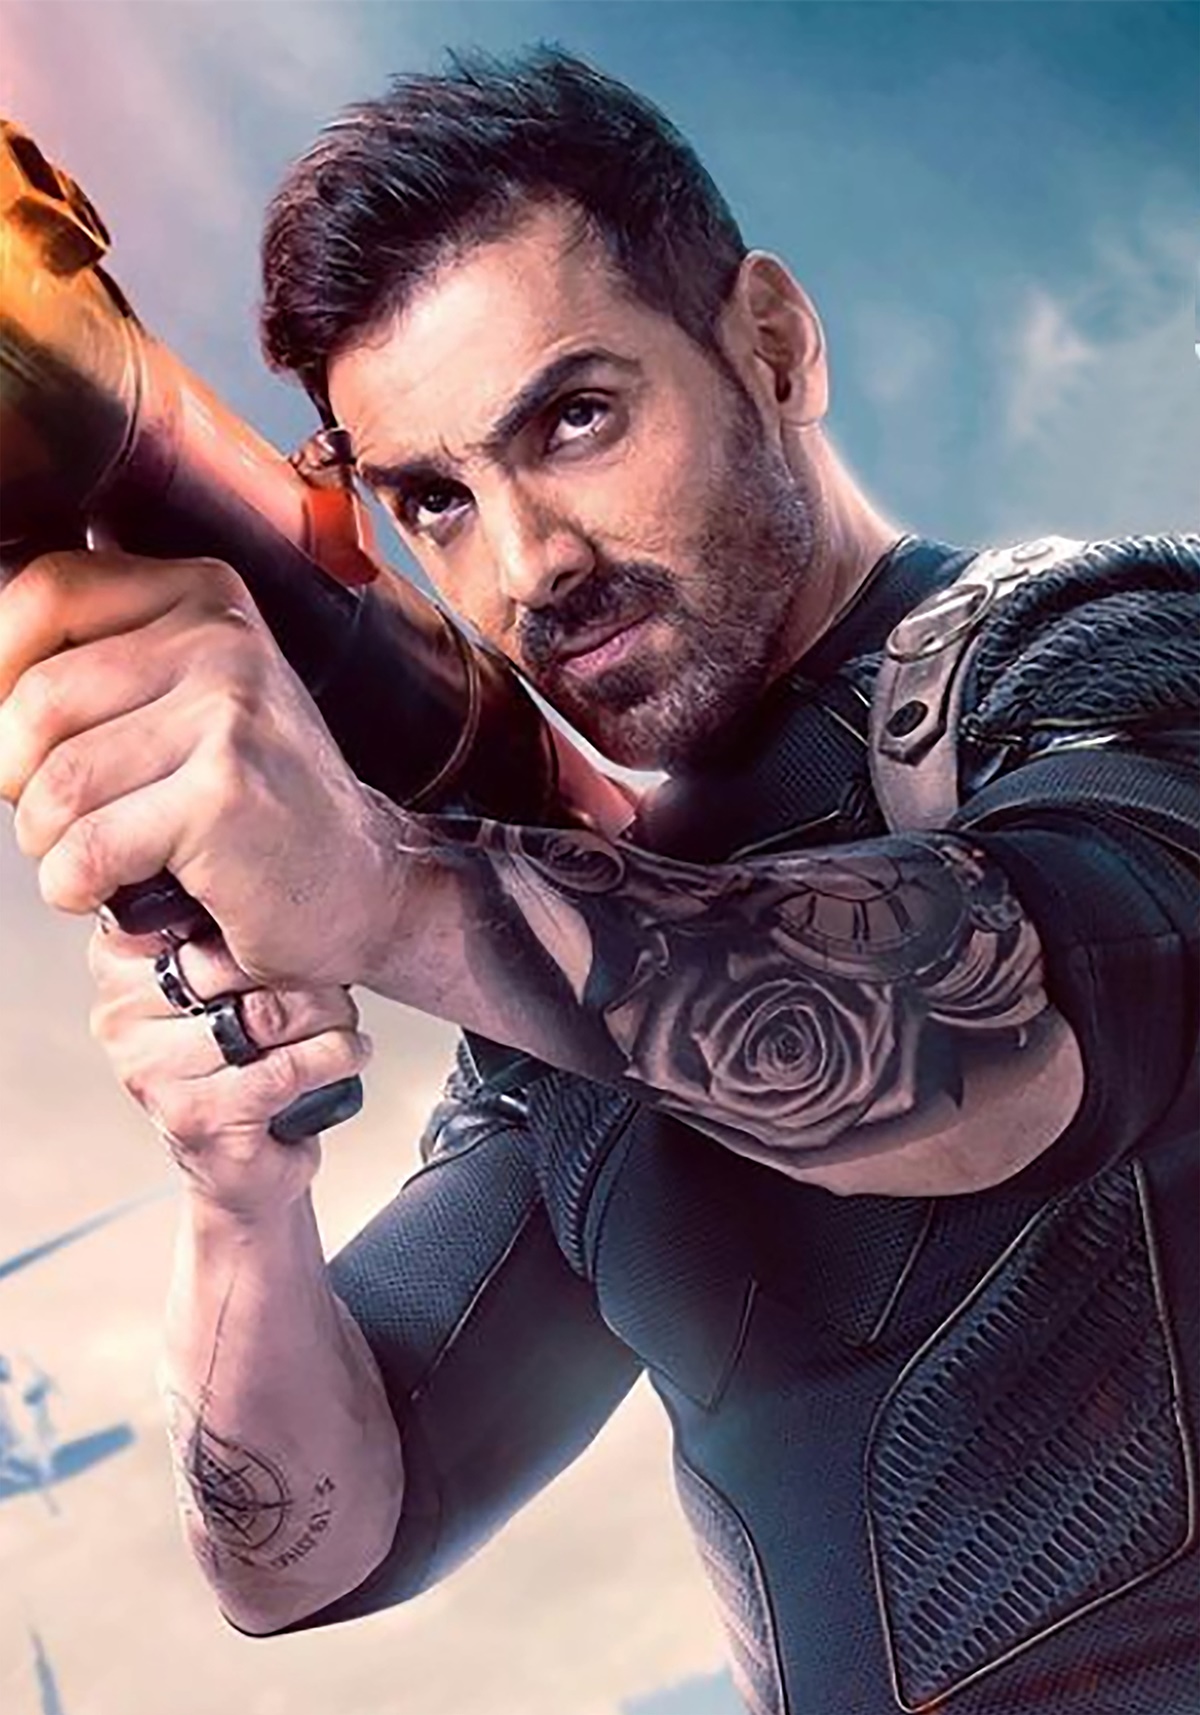 John Abraham is a dream canvas to work with': Brothers Micky and Vikas  Malani on designing tattoos for the actor in Pathaan | Life-style News -  The Indian Express